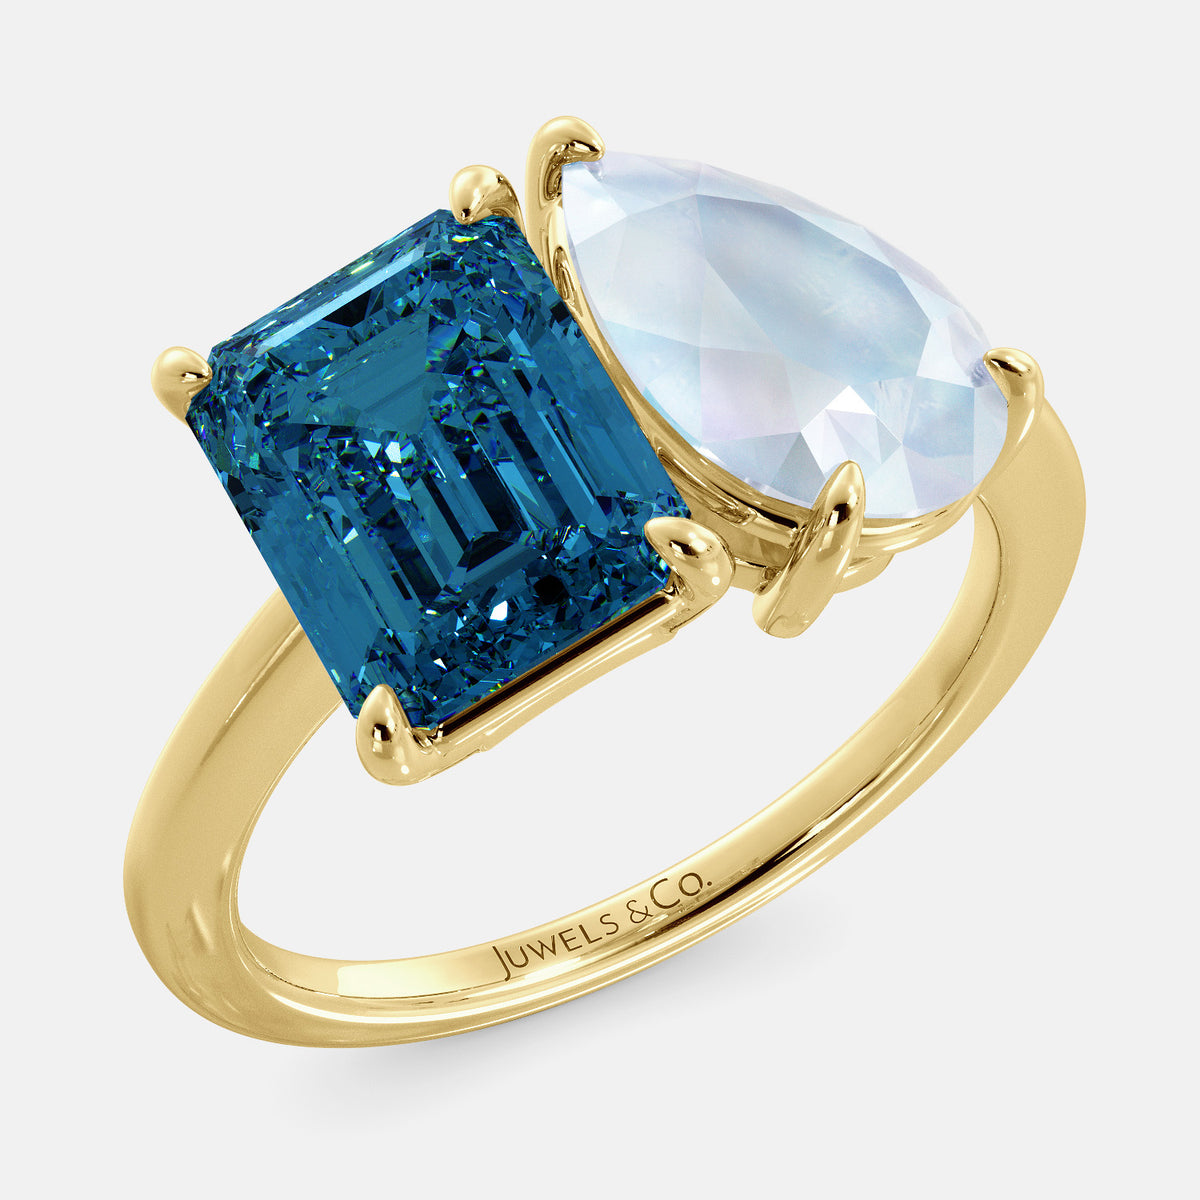 A toi et moi ring with a London blue topaz stone in emerald cut and a pear-shaped stone. The London blue topaz is a bright blue color and the pear-shaped stone can be customized to represent the birth month stone of the wearer or a loved one. The ring is made of 14k yellow gold and available in all sizes. This ring is a perfect gift for any occasion, and it can be customized to make it truly unique.